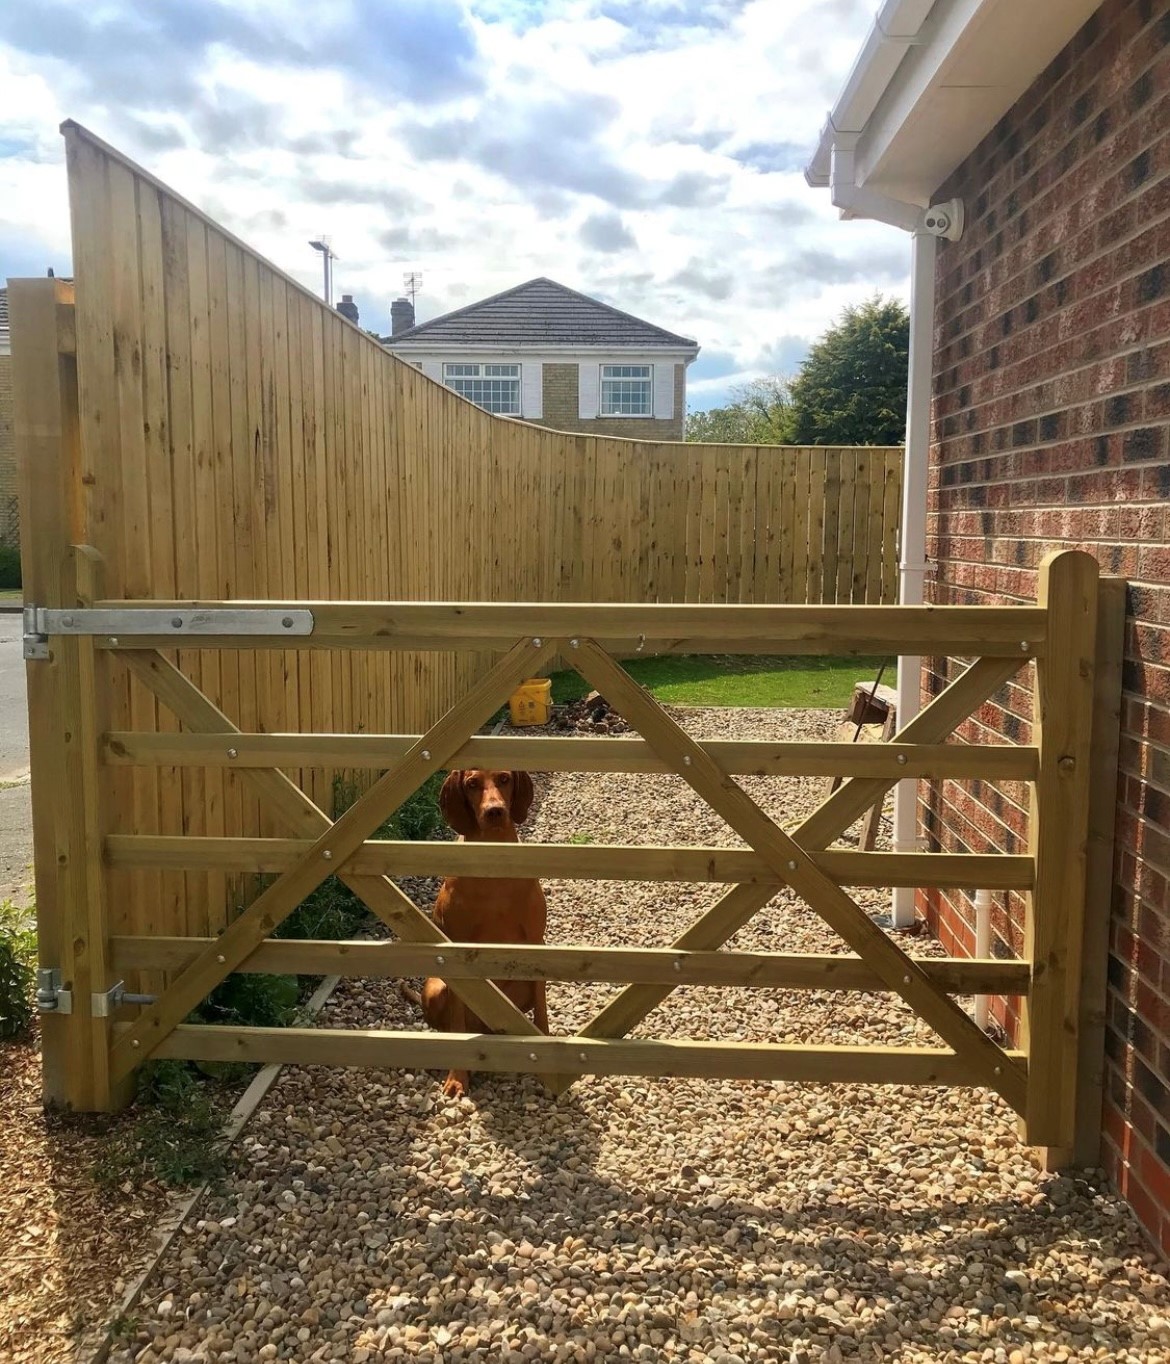 an image of a wooden gate on the side of a home with a dog behind it